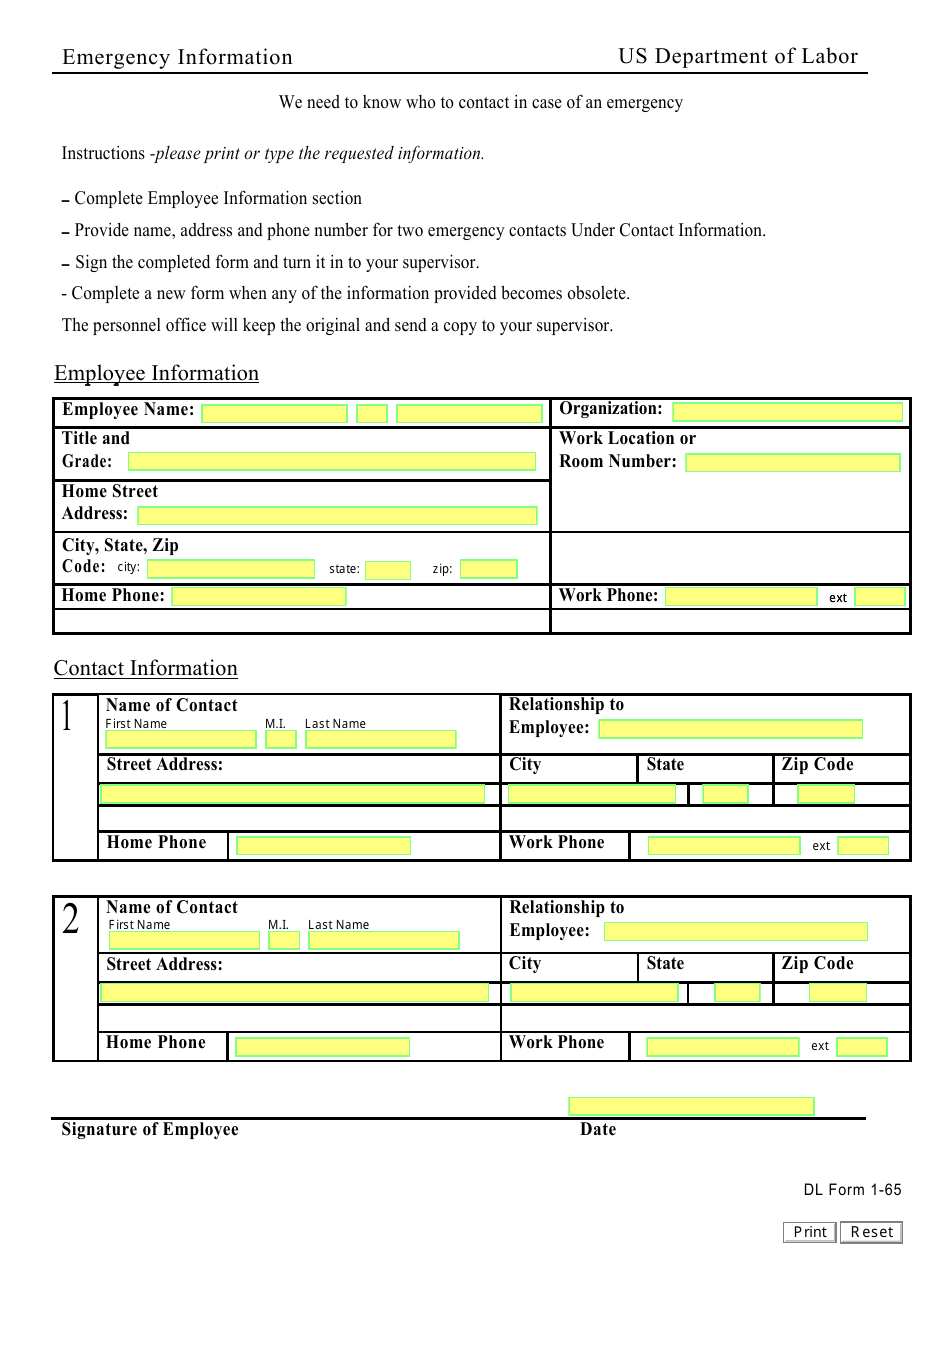 Form 1-65 Emergency Information, Page 1